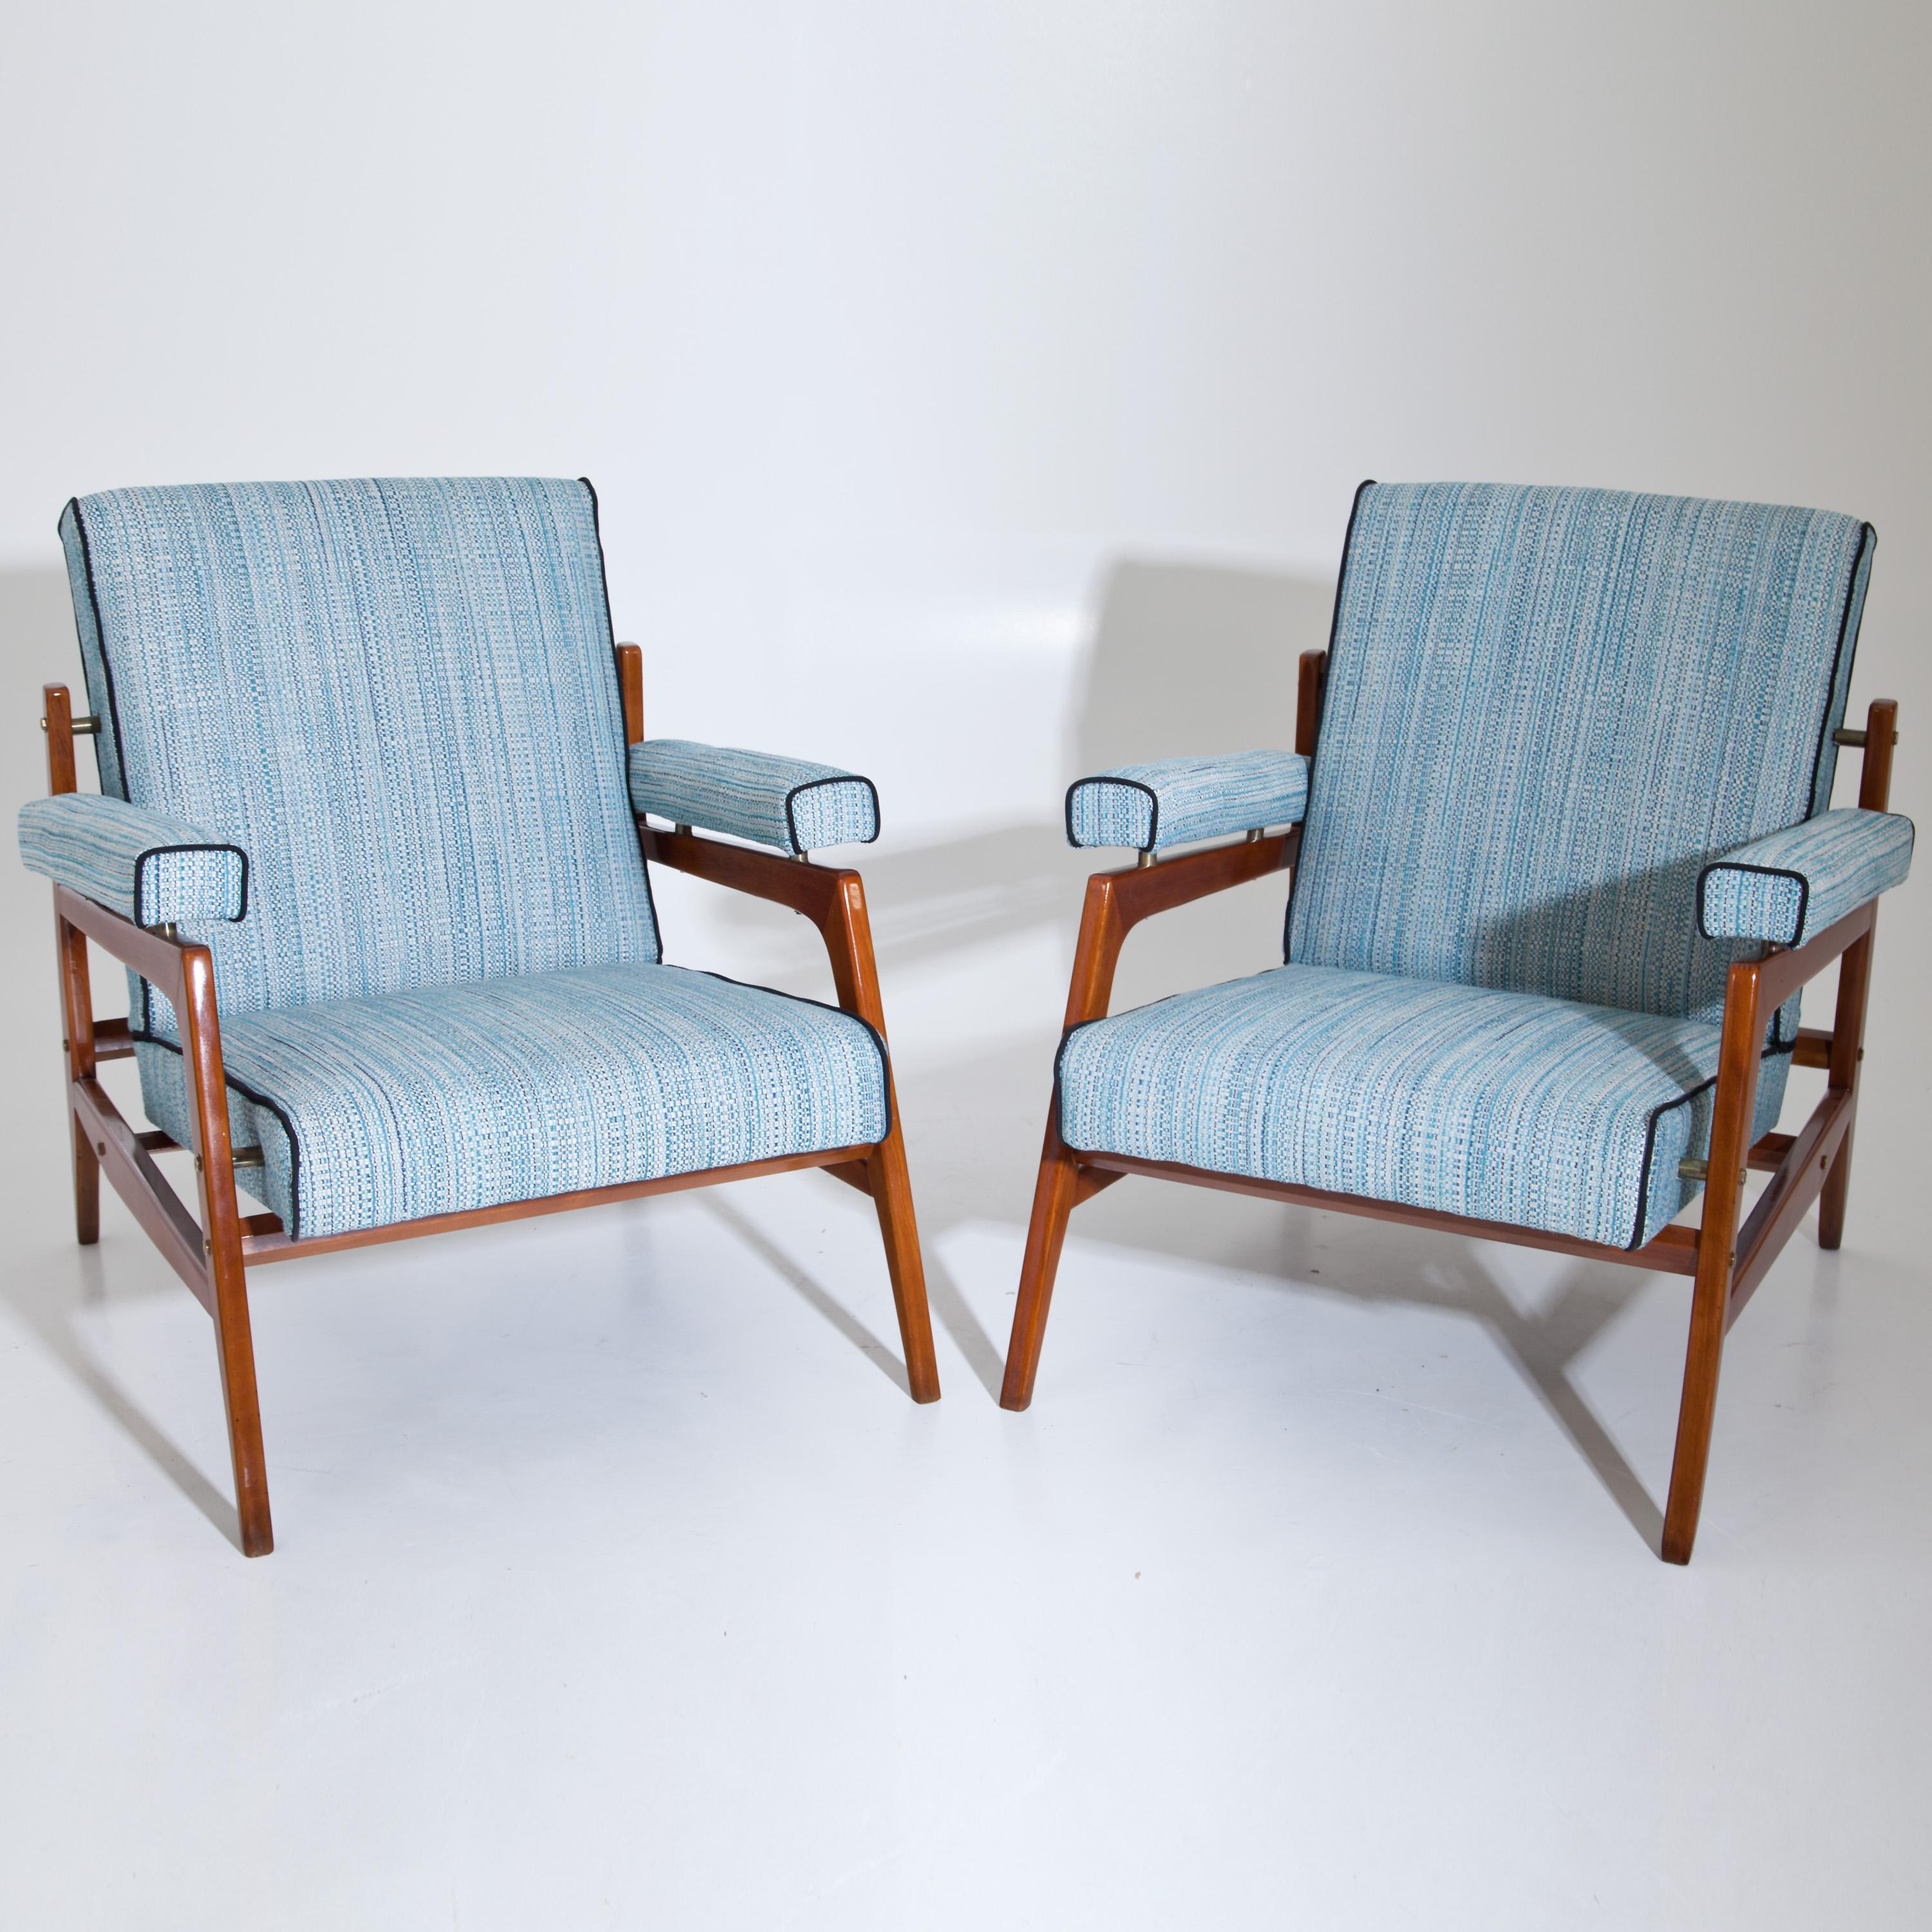 Italian Seating Group, Italy, Mid-20th Century For Sale